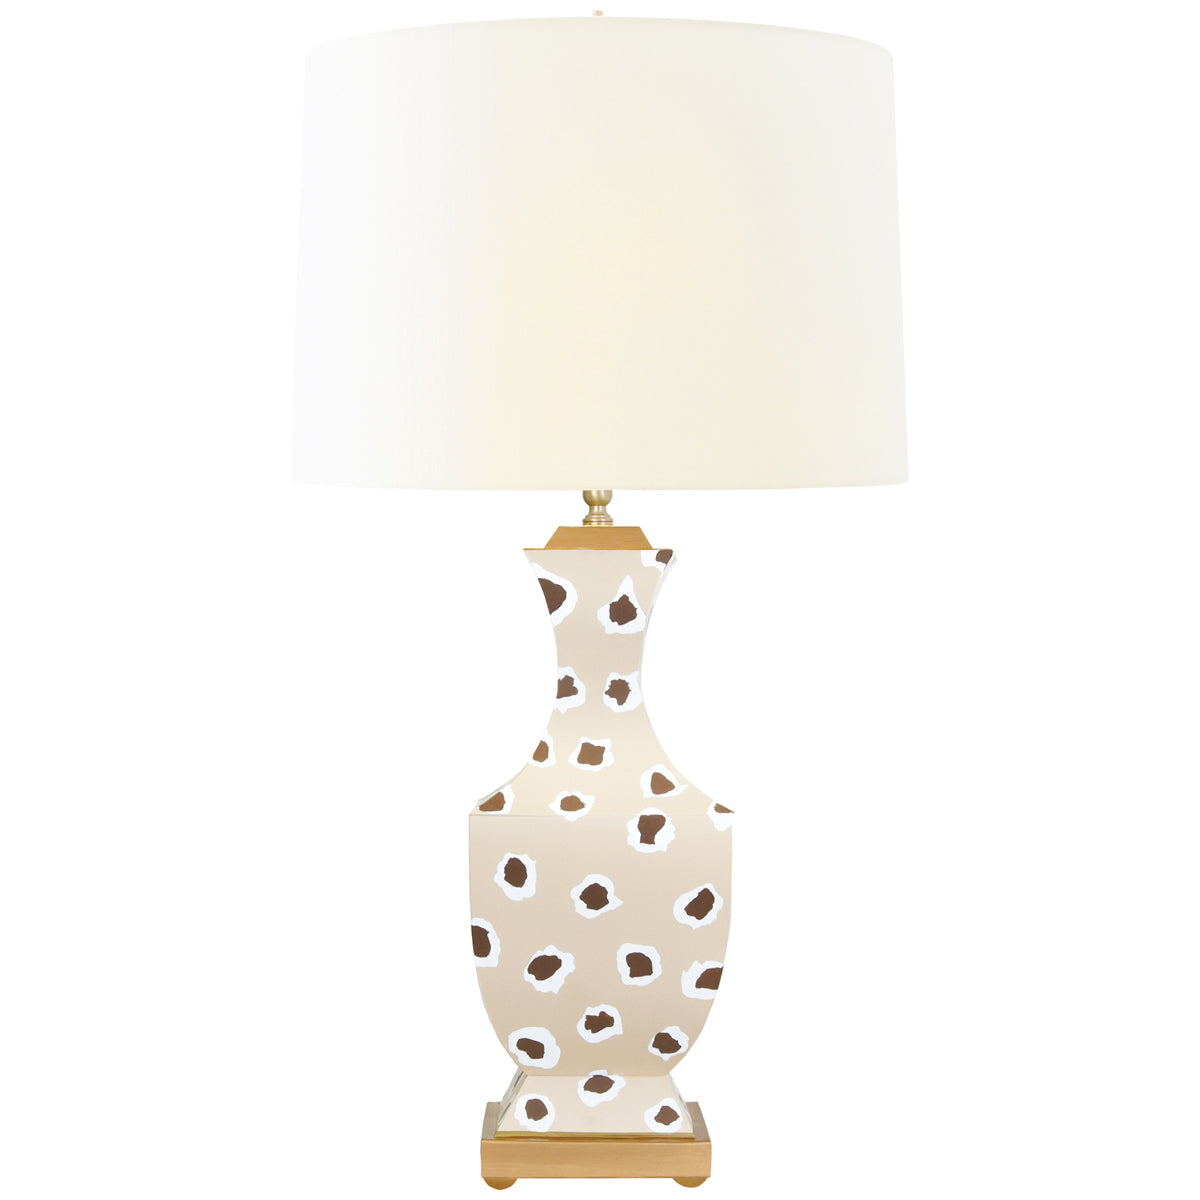 Worlds Away Handpainted Tole Table Lamp in Brown Leopard Pattern